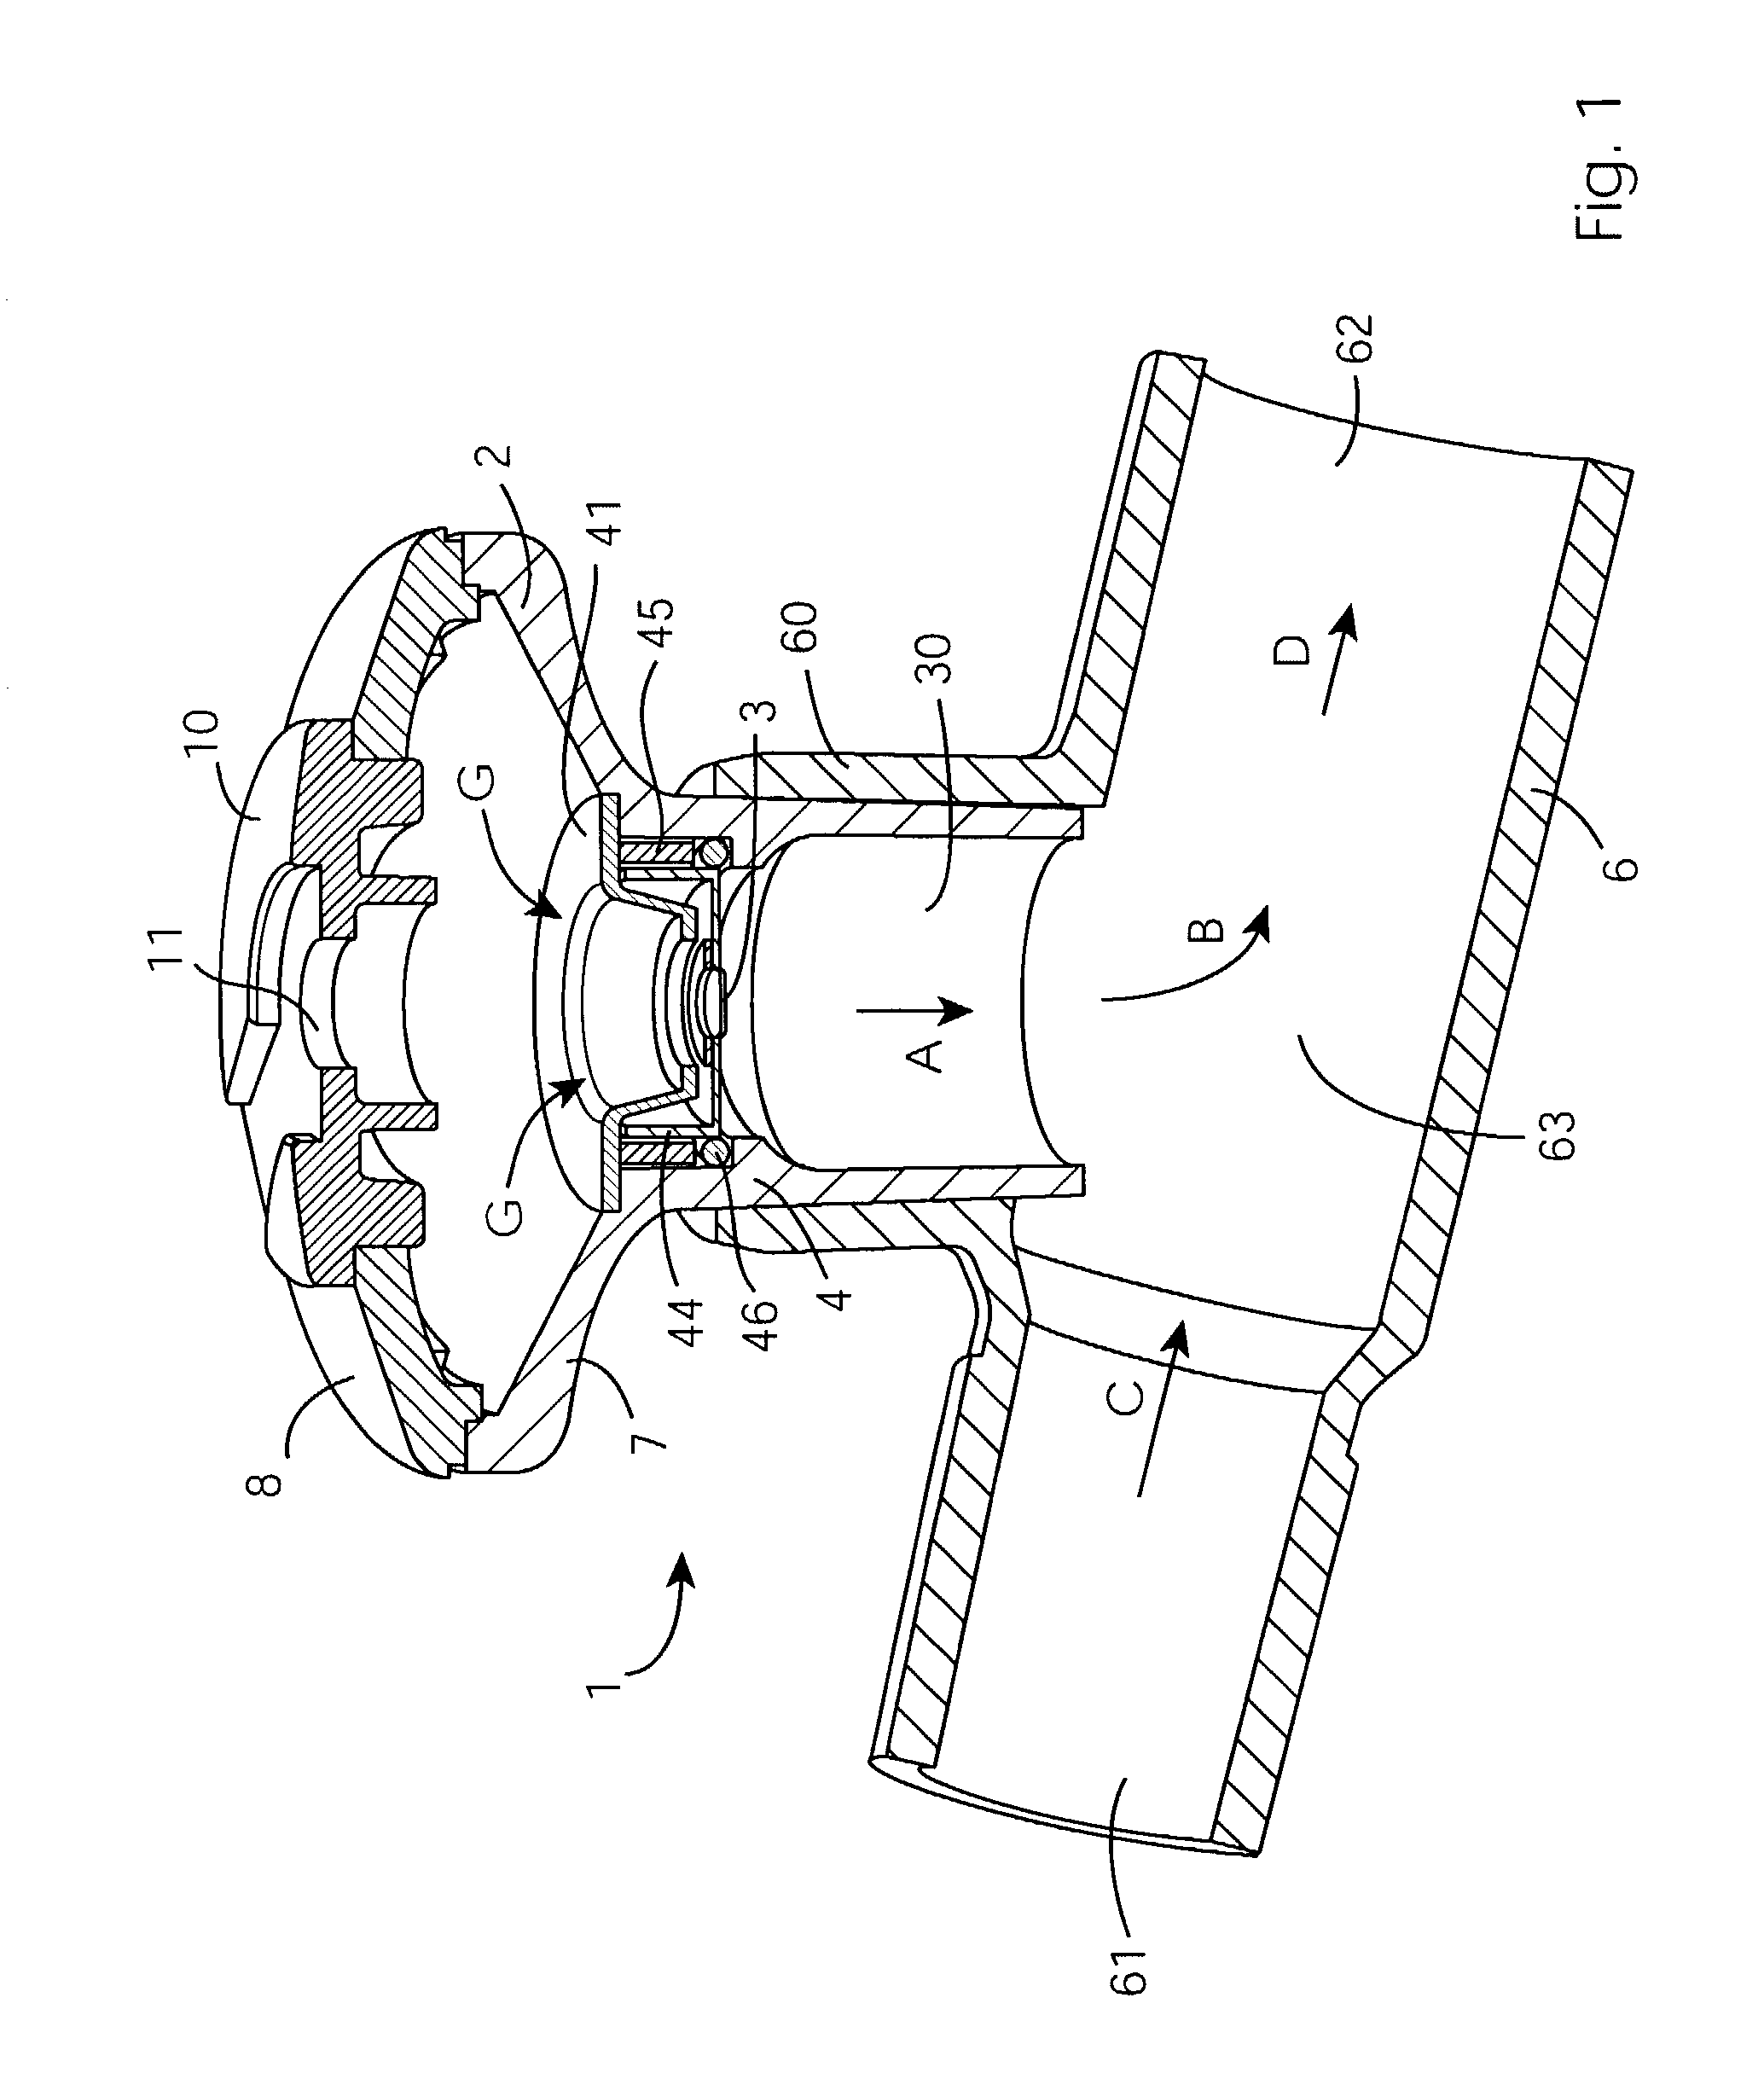 Apparatus and methods for delivery of medicament to a respiratory system